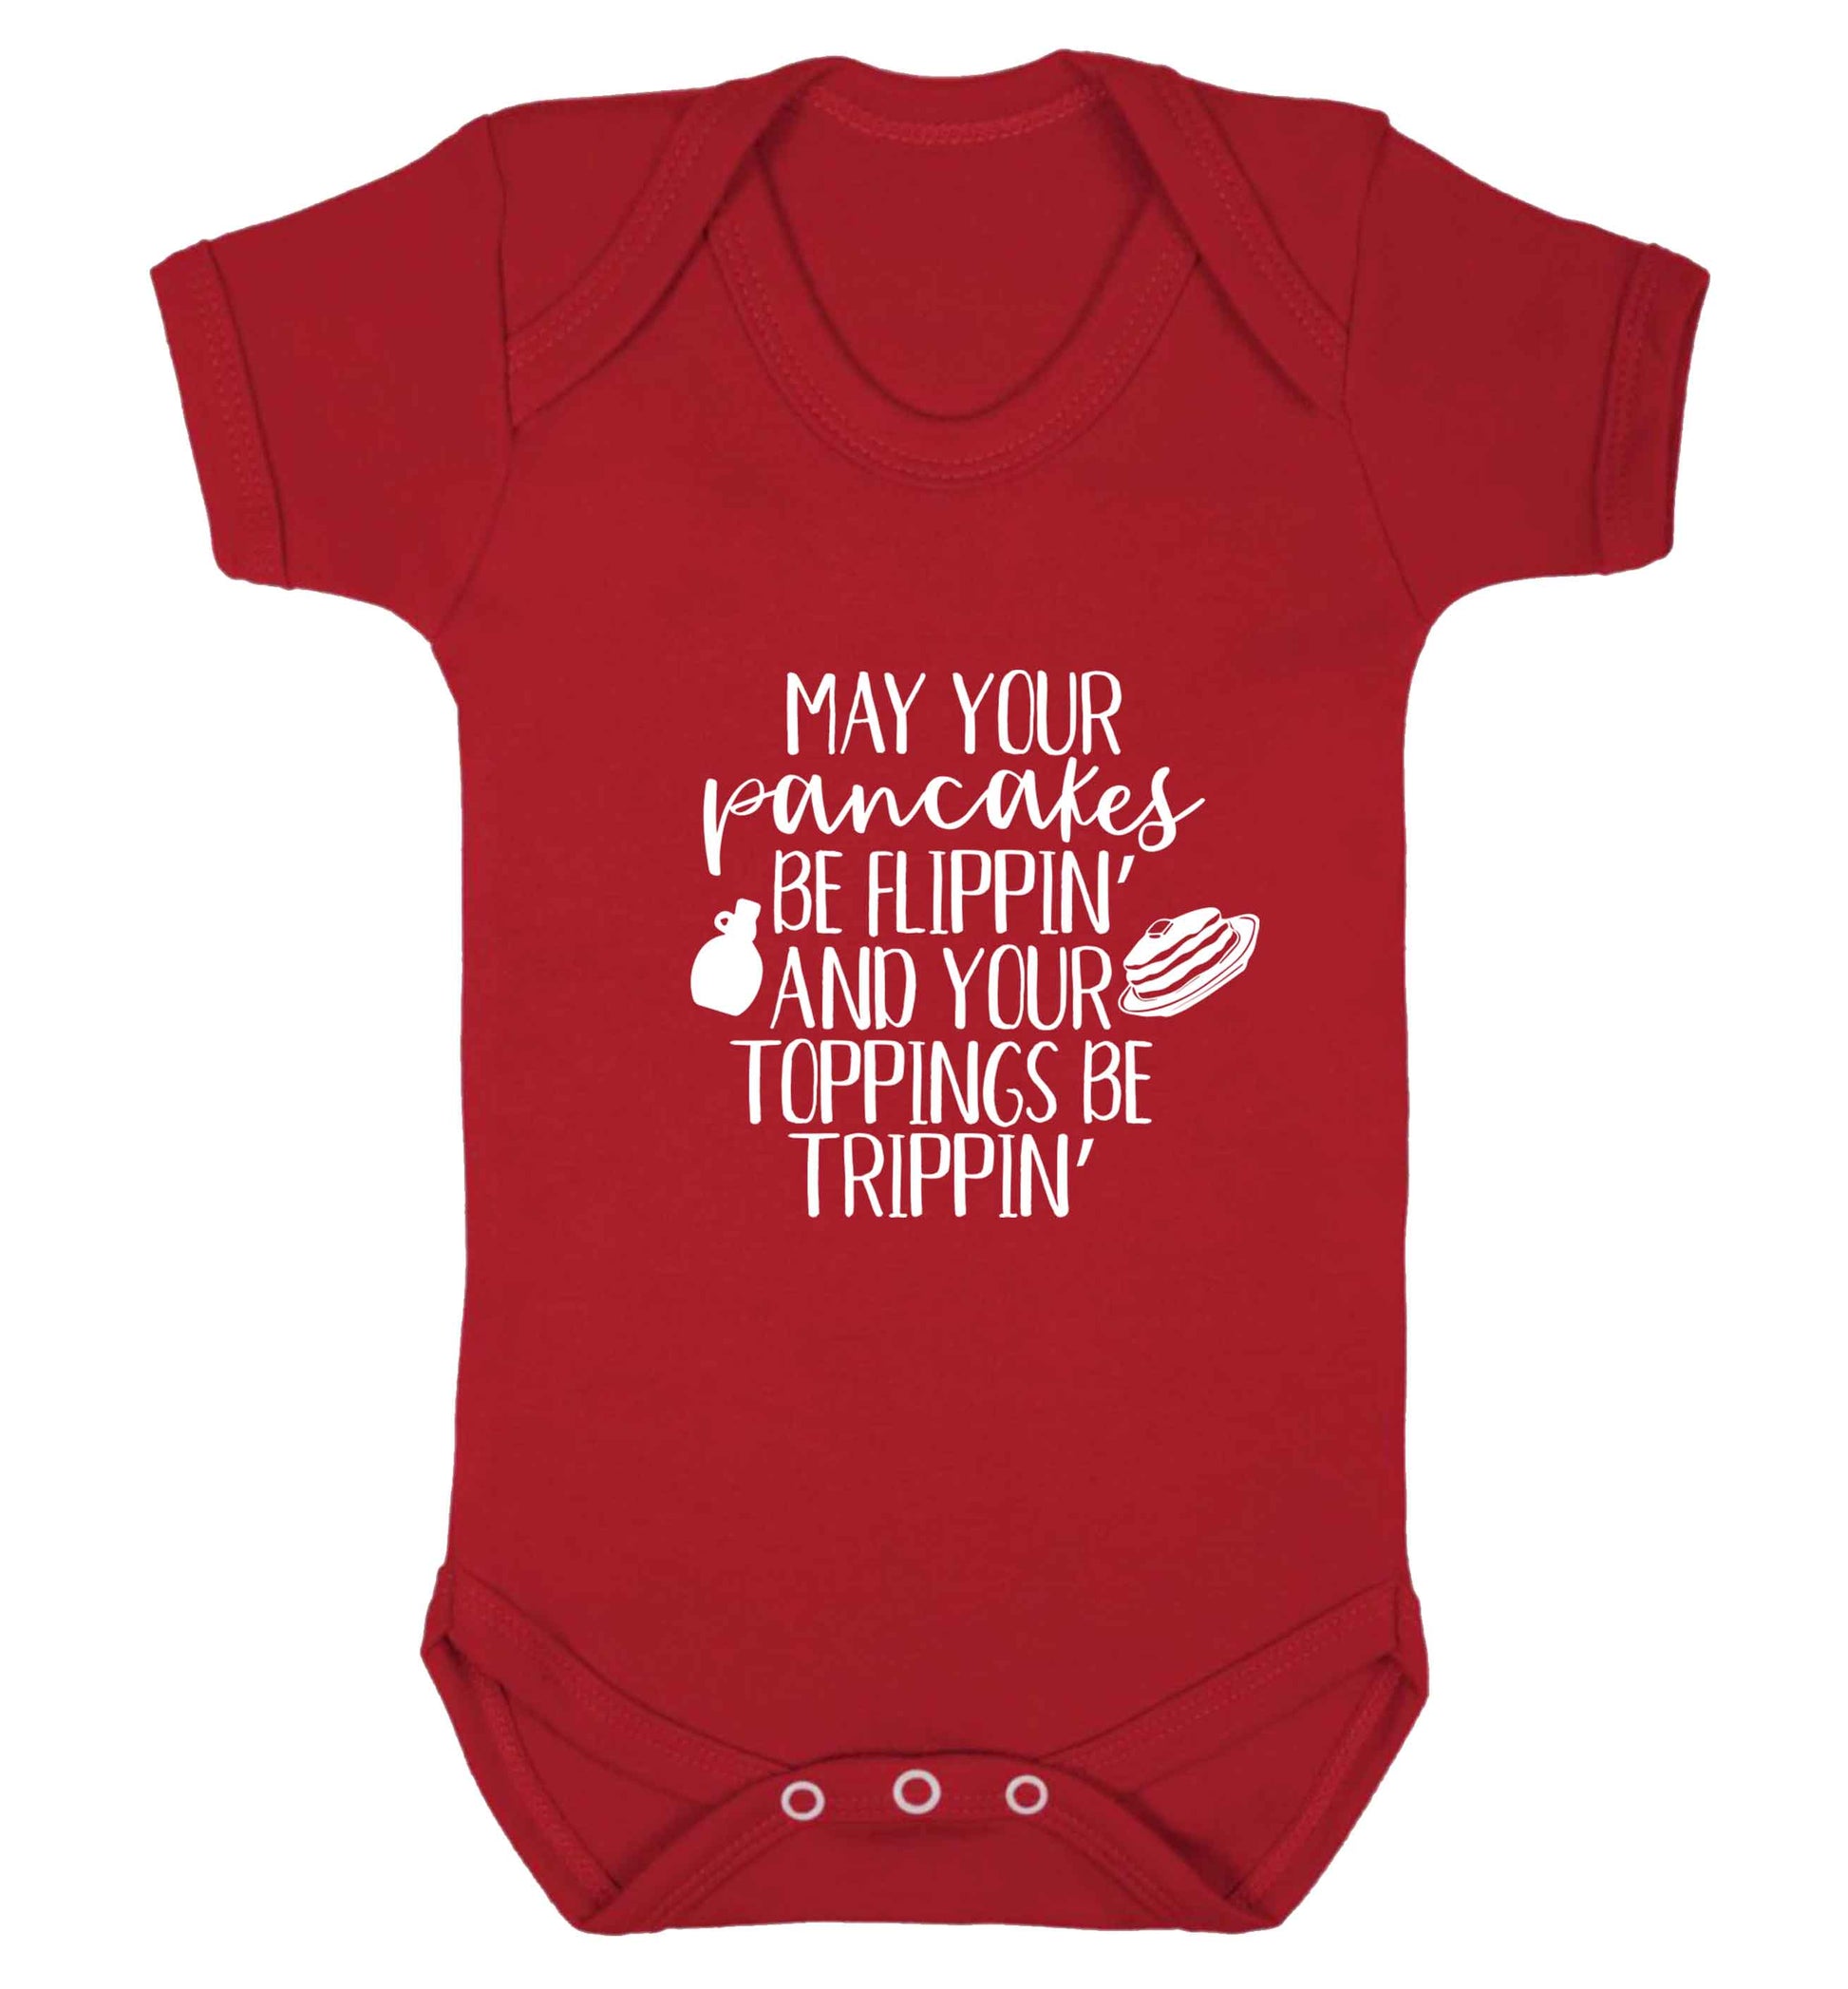 May your pancakes be flippin' and your toppings be trippin' baby vest red 18-24 months